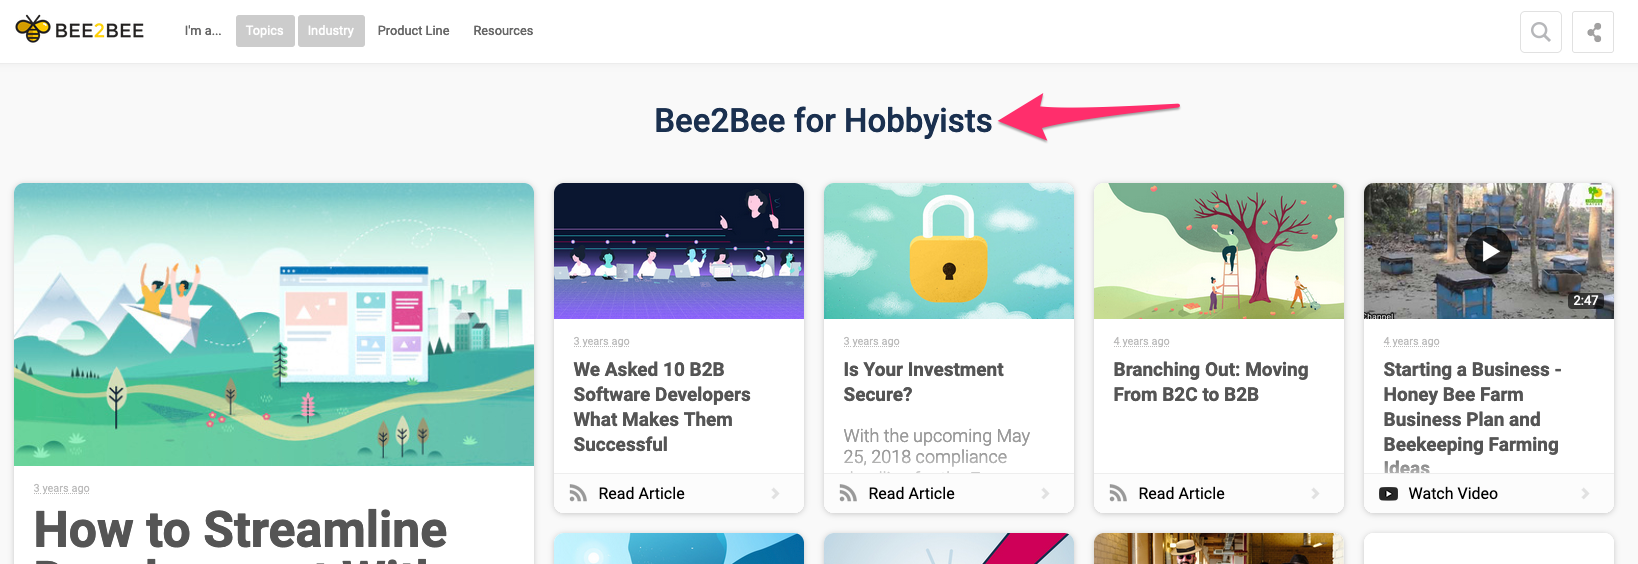 Bee2Bee_for_Hobbyists.png